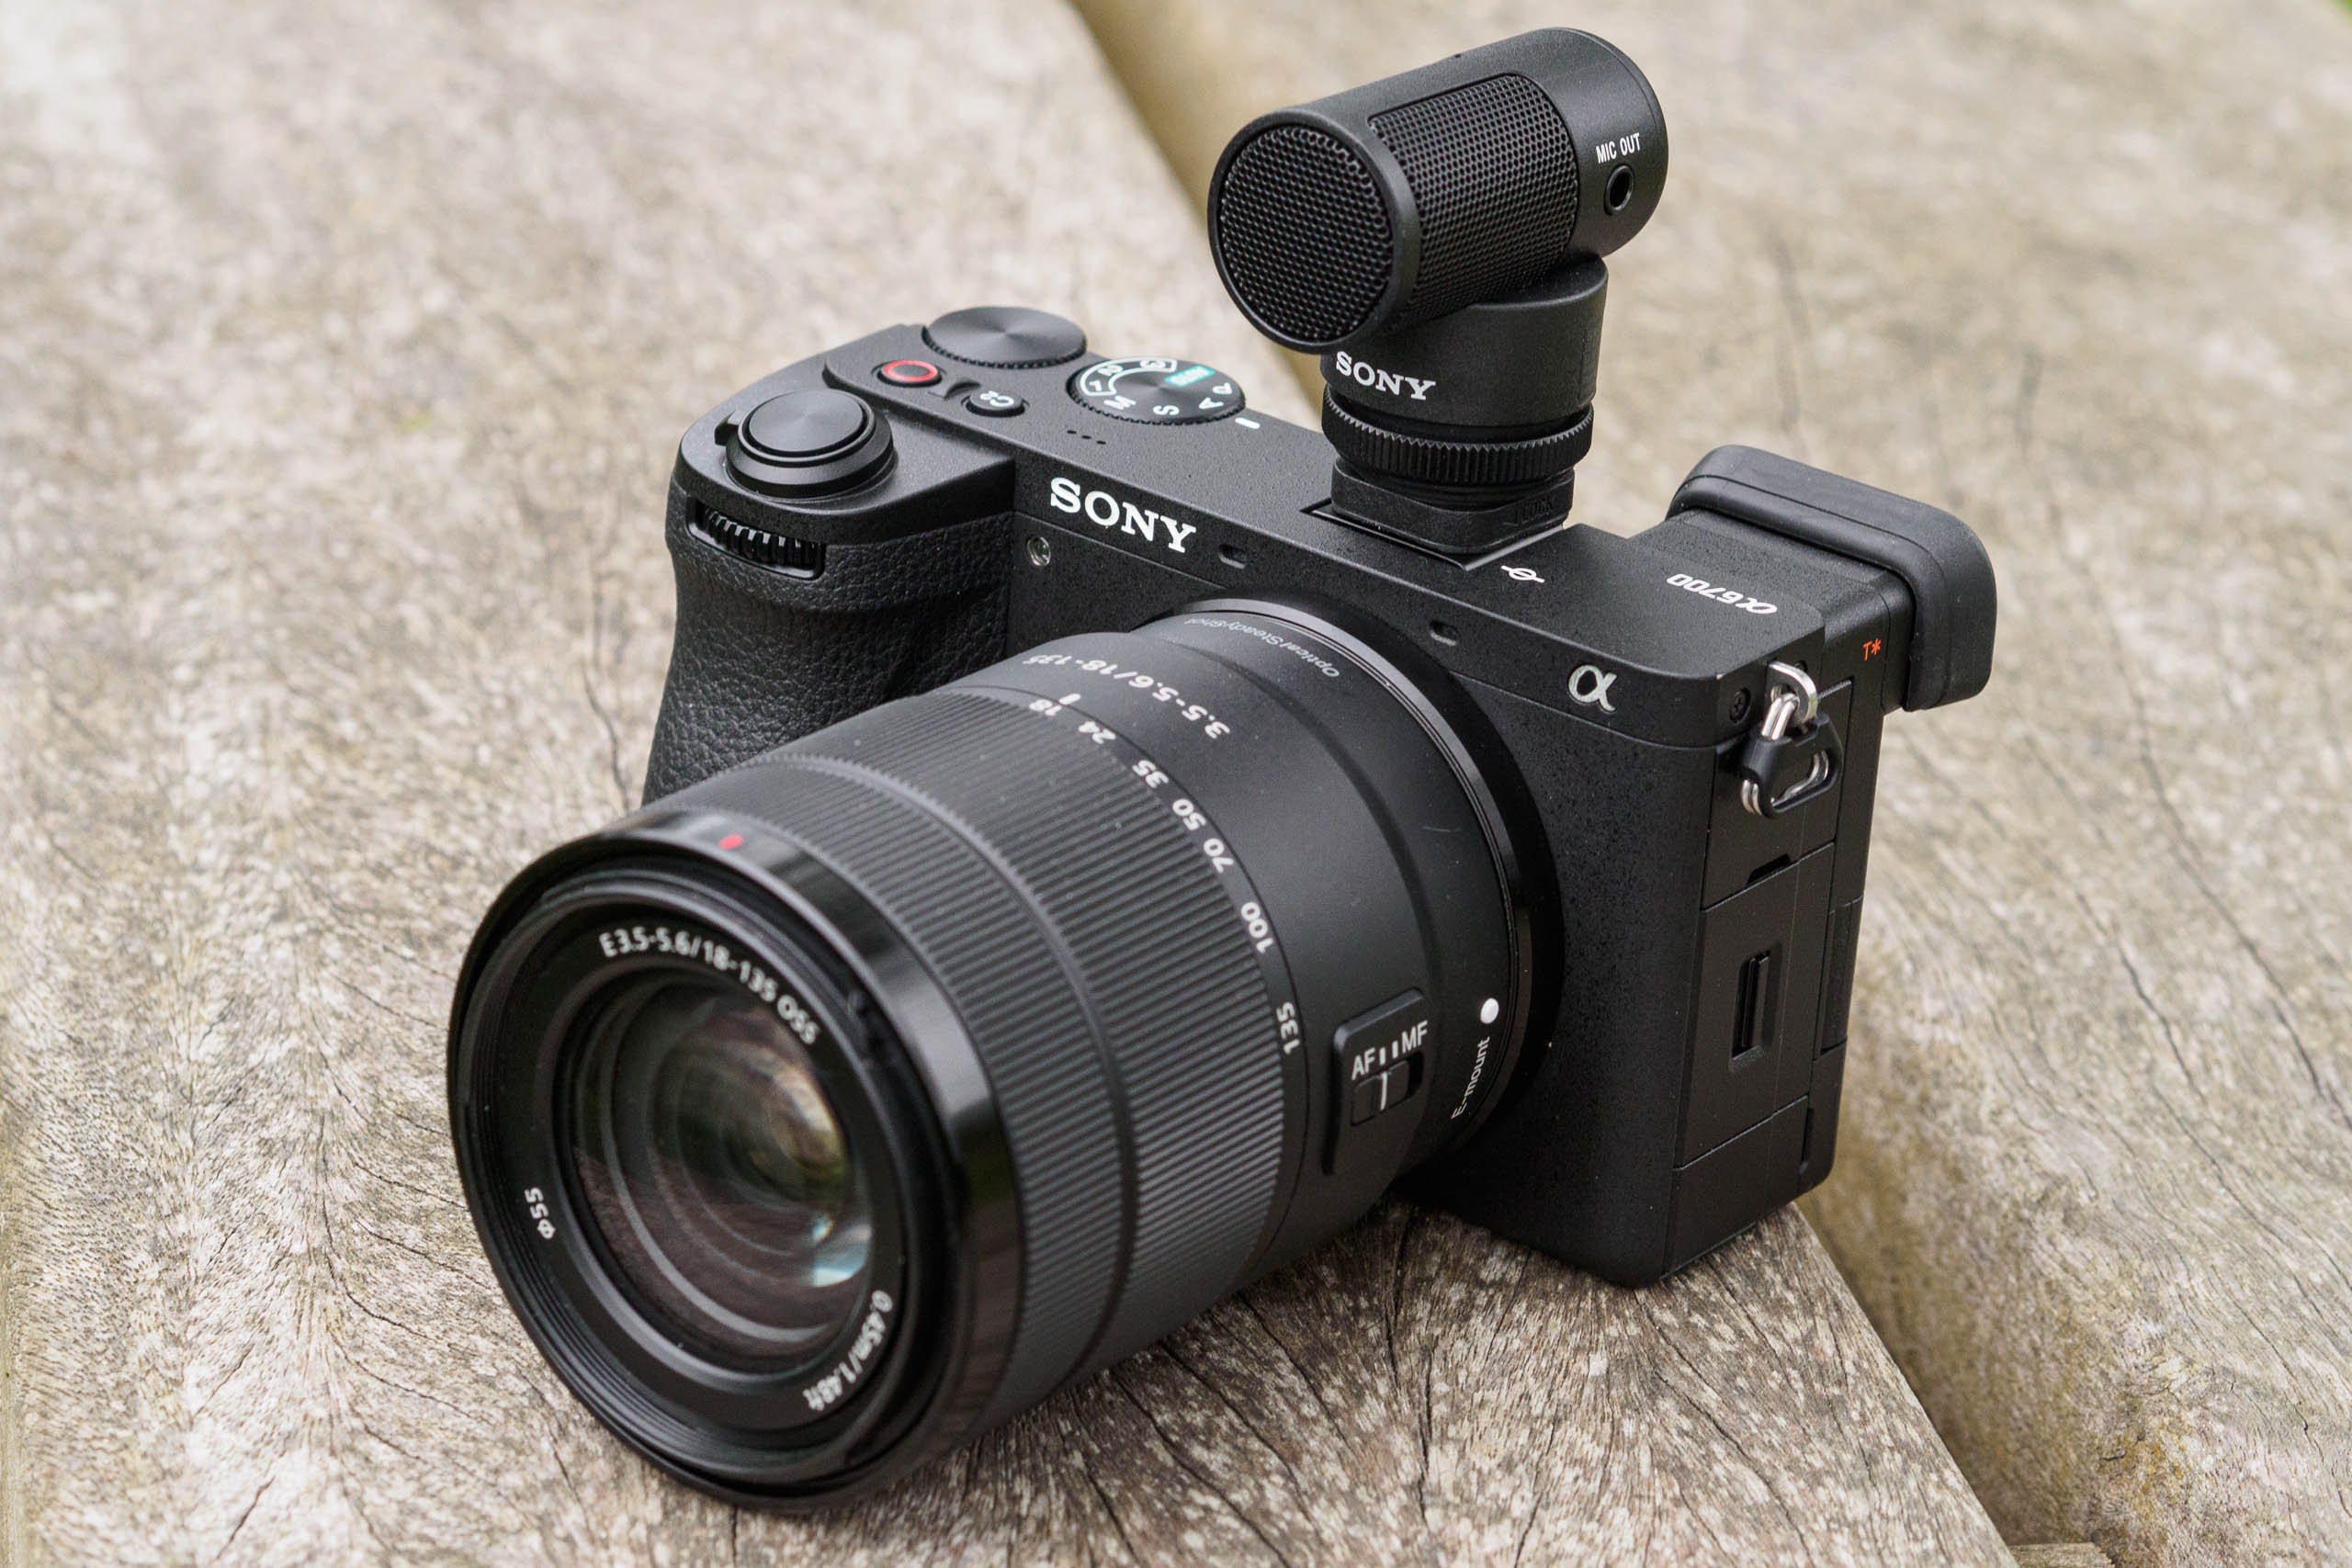 Sony Alpha a6700 Camera With 16-50mm f/3.5-5.6 Lens - ILCE-6700L